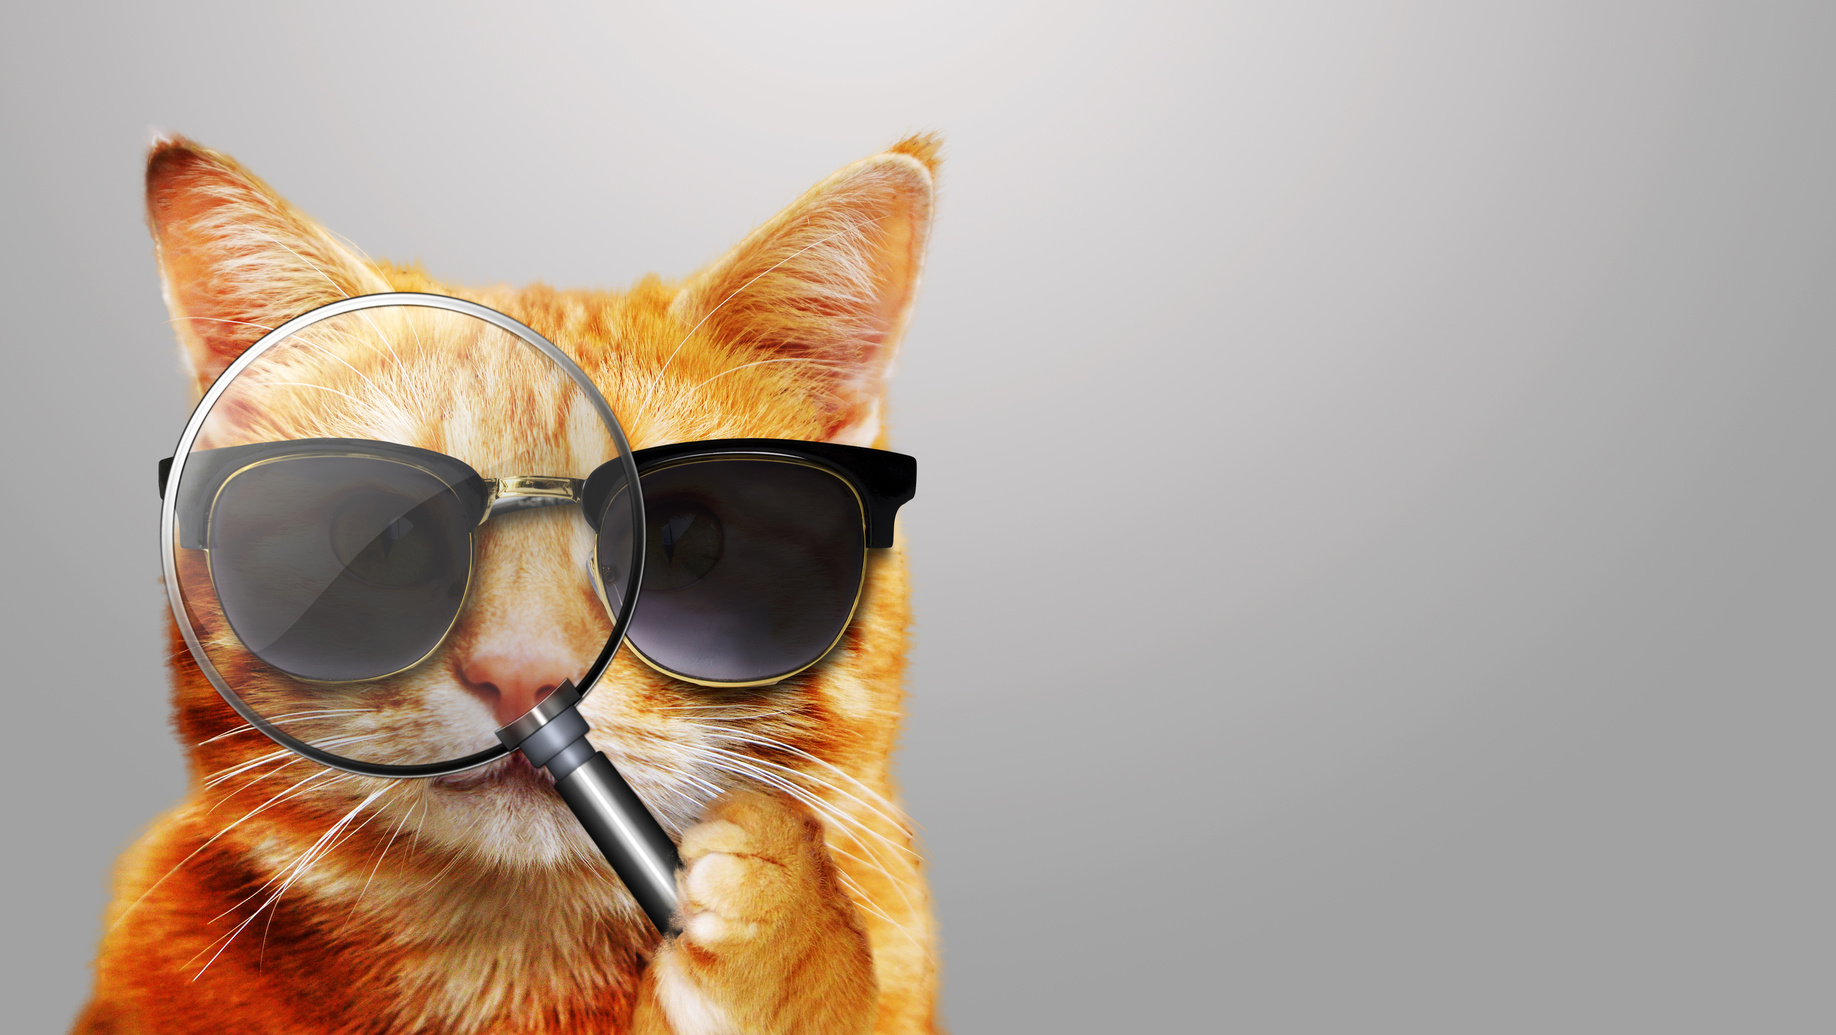 Katze mit Lupe - Cat with magnifier and sunglasses